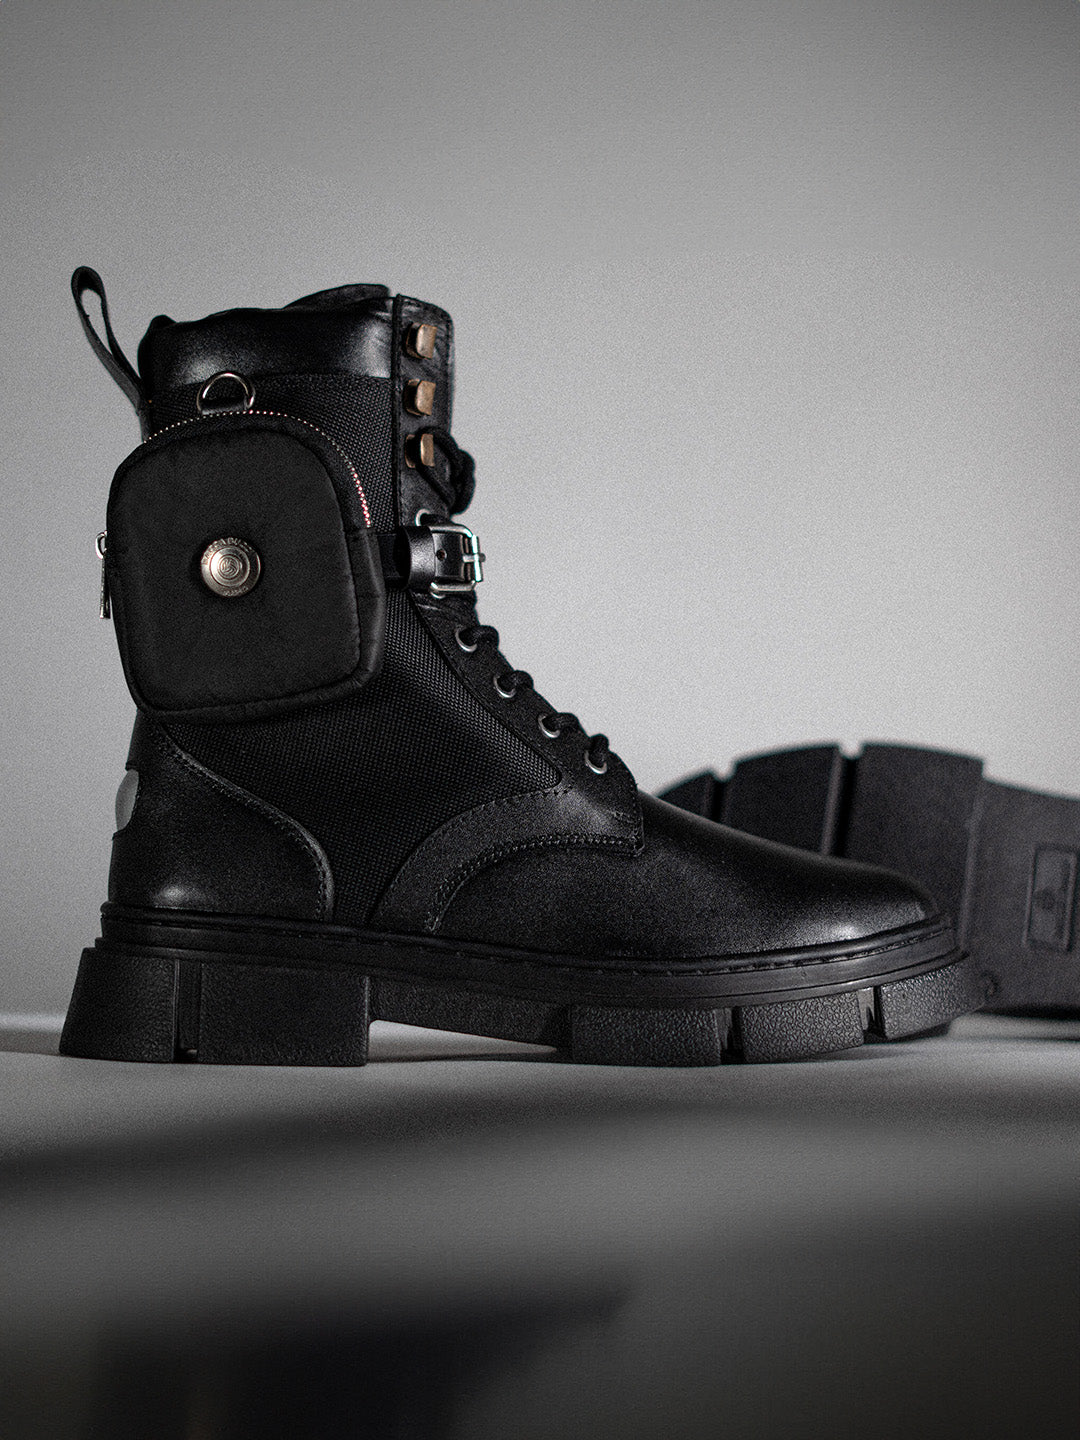 Bacca Bucci ASSASSIN Genuine brushed leather combat boots with detachable coin pocket and a chunky rubber lug sole